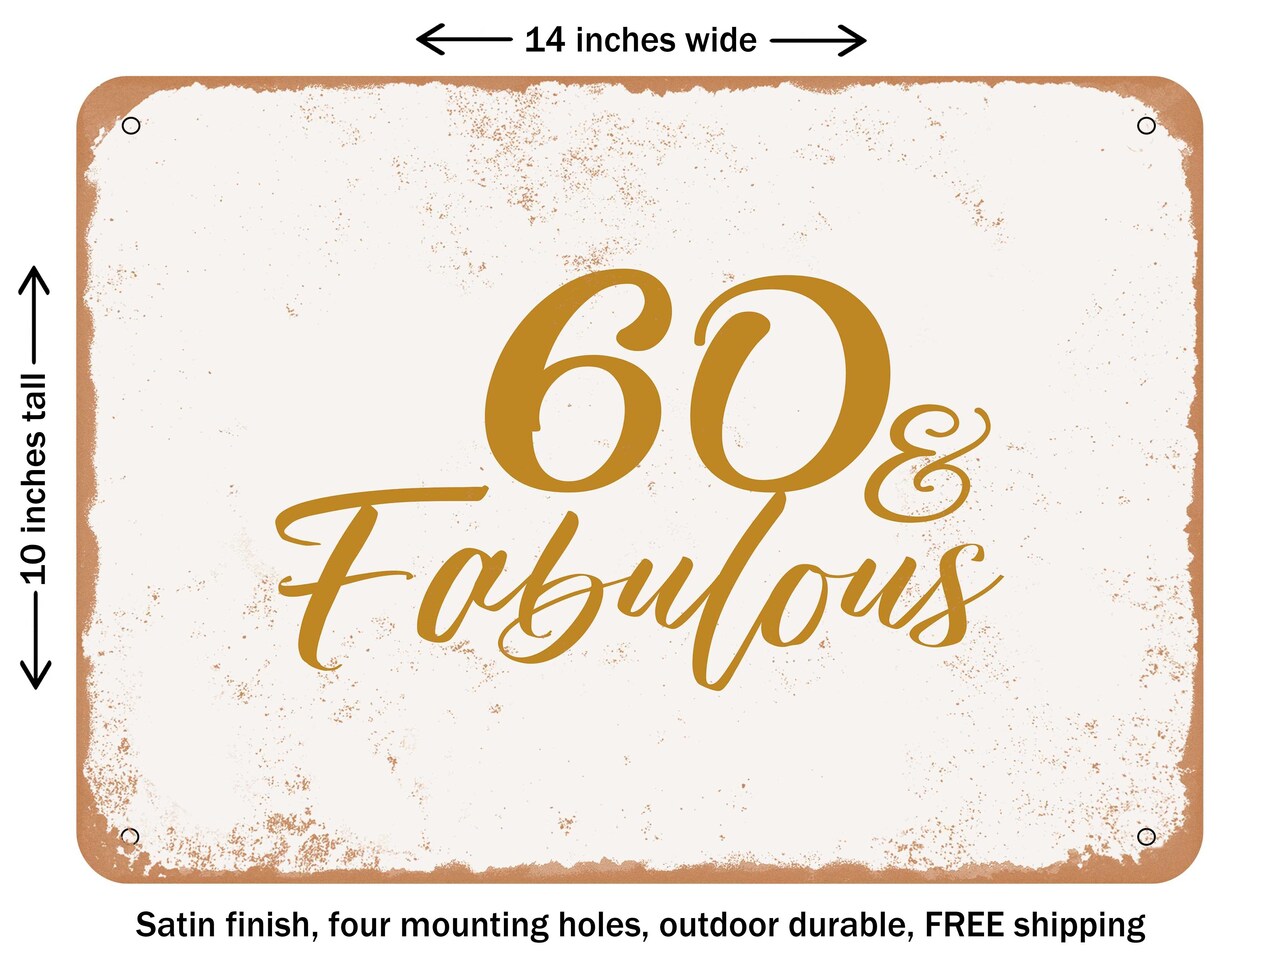 DECORATIVE METAL SIGN - 0 and Fabulous1 - Vintage Rusty Look